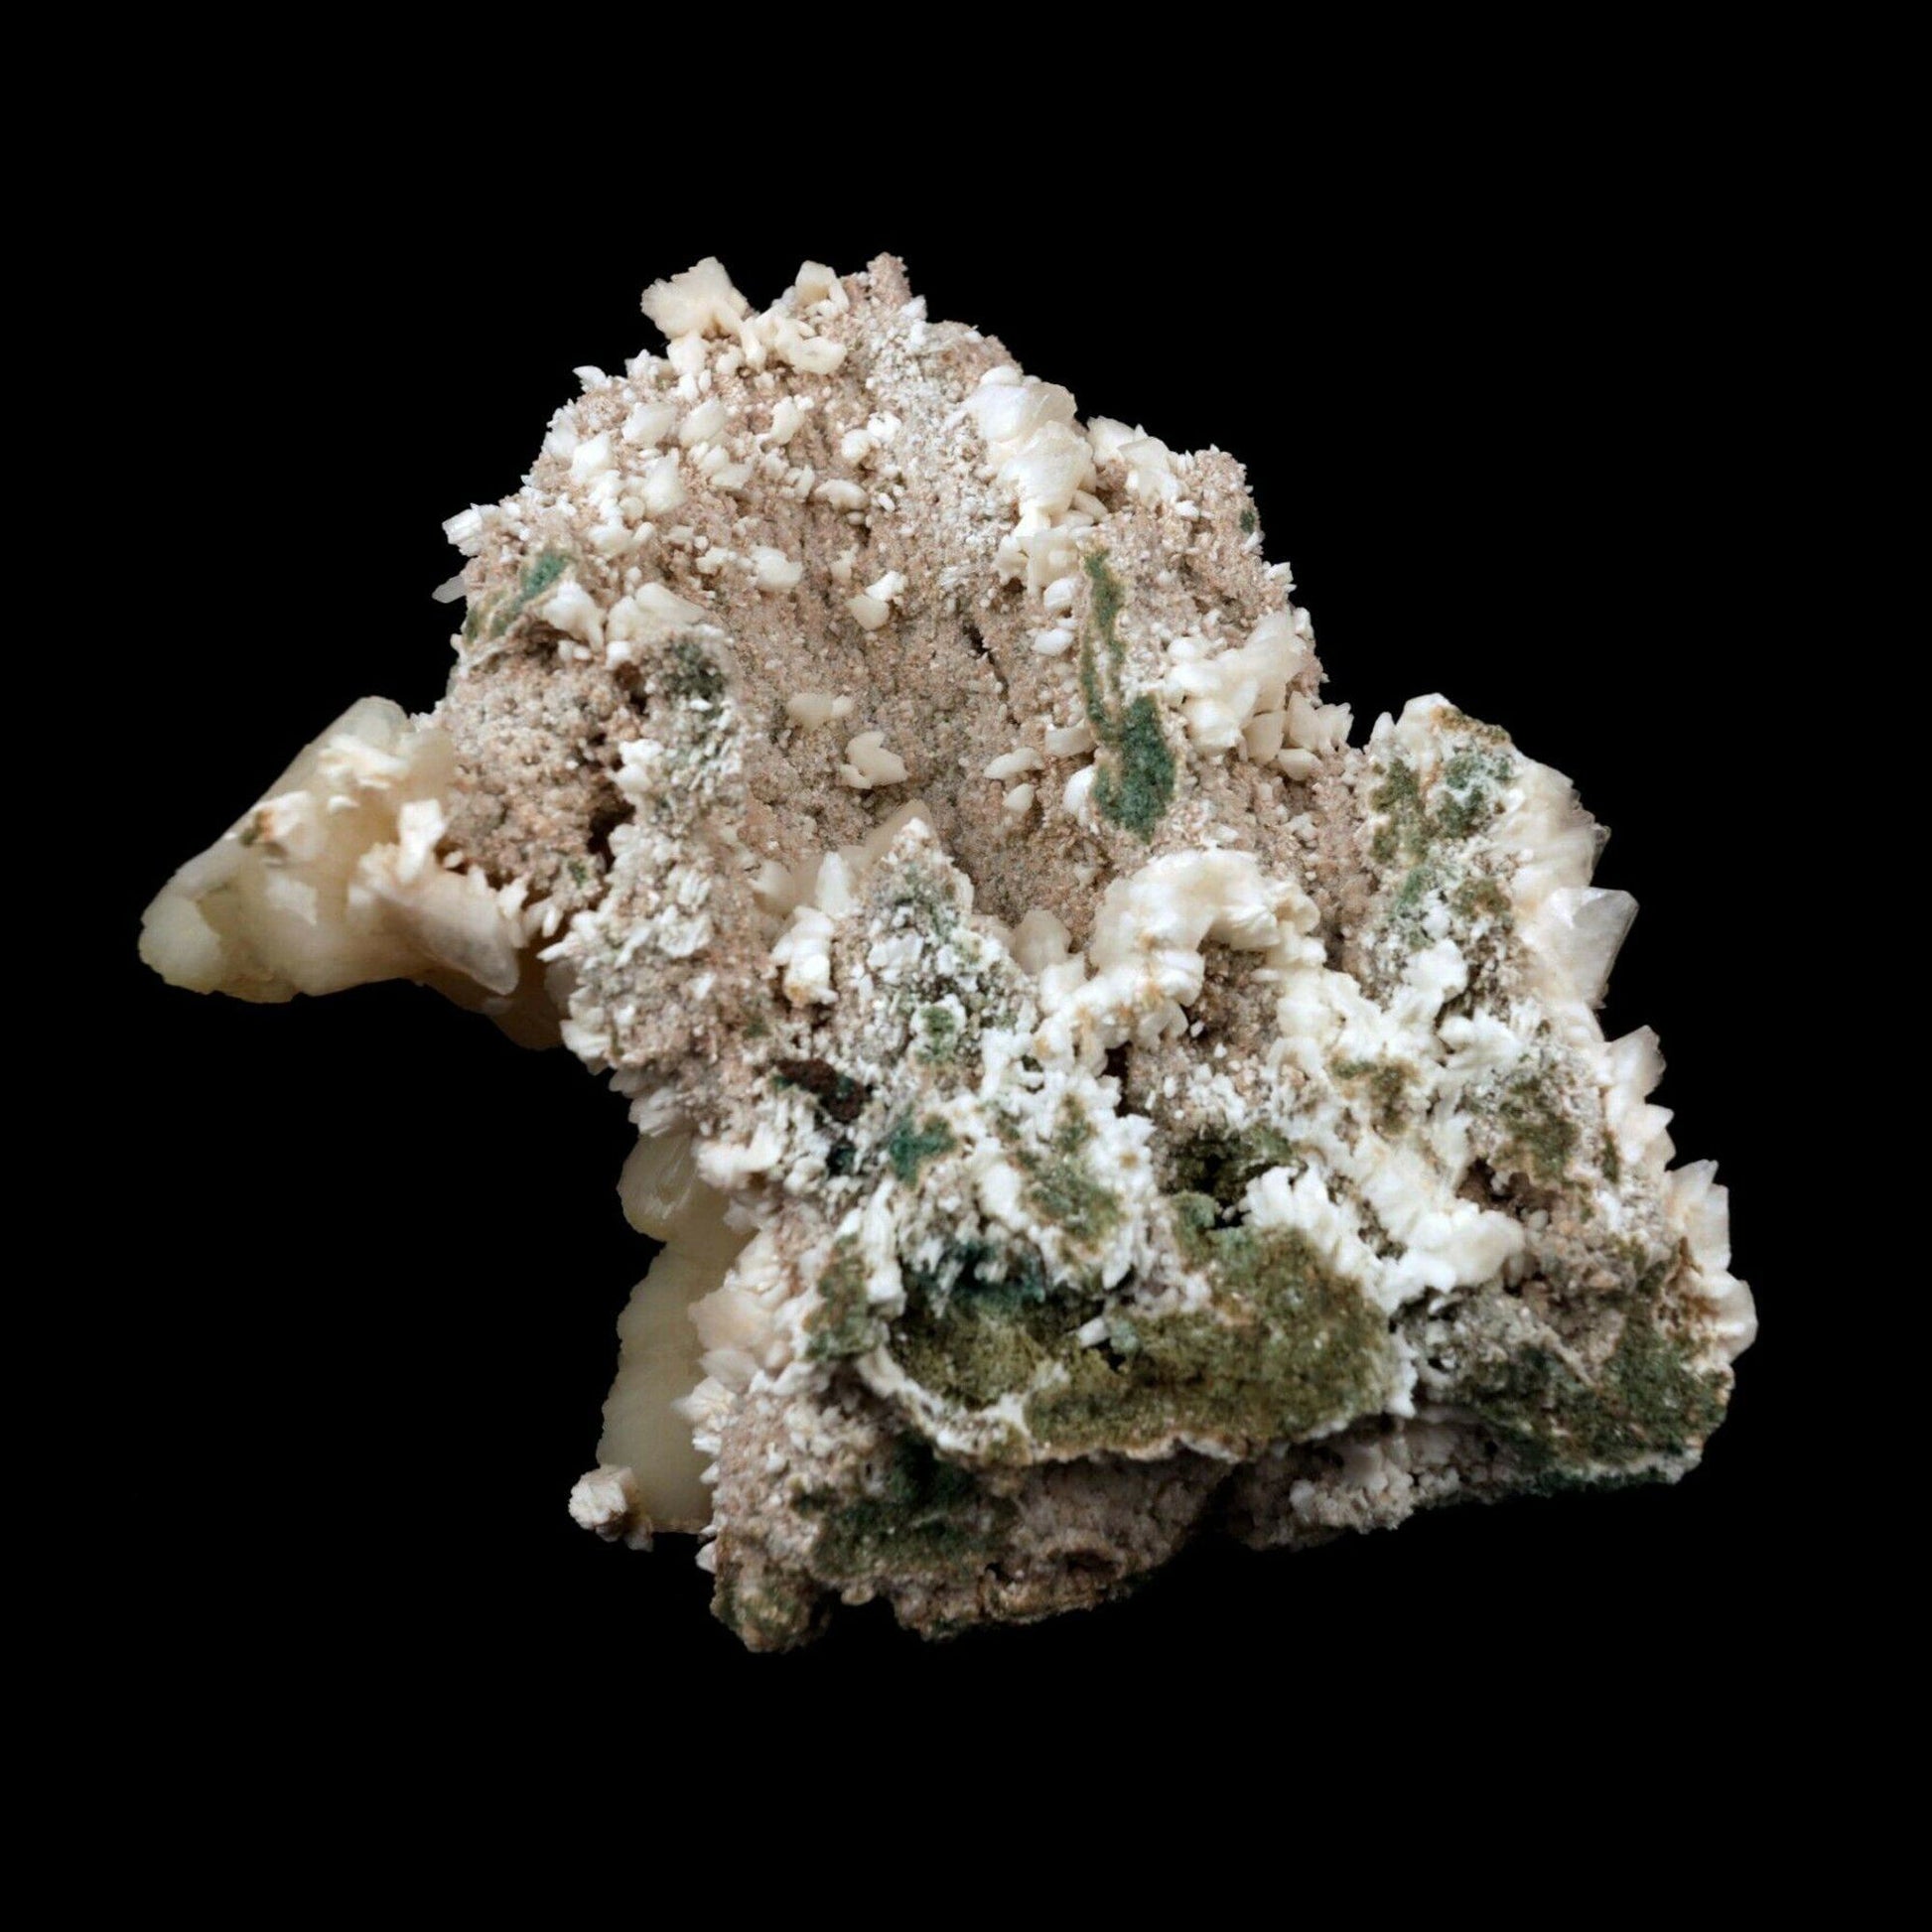 Stilbite Bow Shape Crystal on Heulandite Natural Mineral Specimen # B …  https://www.superbminerals.us/products/stilbite-bow-shape-crystal-on-heulandite-natural-mineral-specimen-b-3634  Features:An exceptionally large cluster of Stilbite crystals in a classic bow tie formation along with numerous smaller Stilbite crystals on contrasting matrix. Primary Mineral(s): MM QuartzSecondary Mineral(s): StilbiteMatrix: N/A14 cm x 12 cm500 GmsLocality: Aurangabad, Maharashtra, IndiaYear of Discovery: 2020